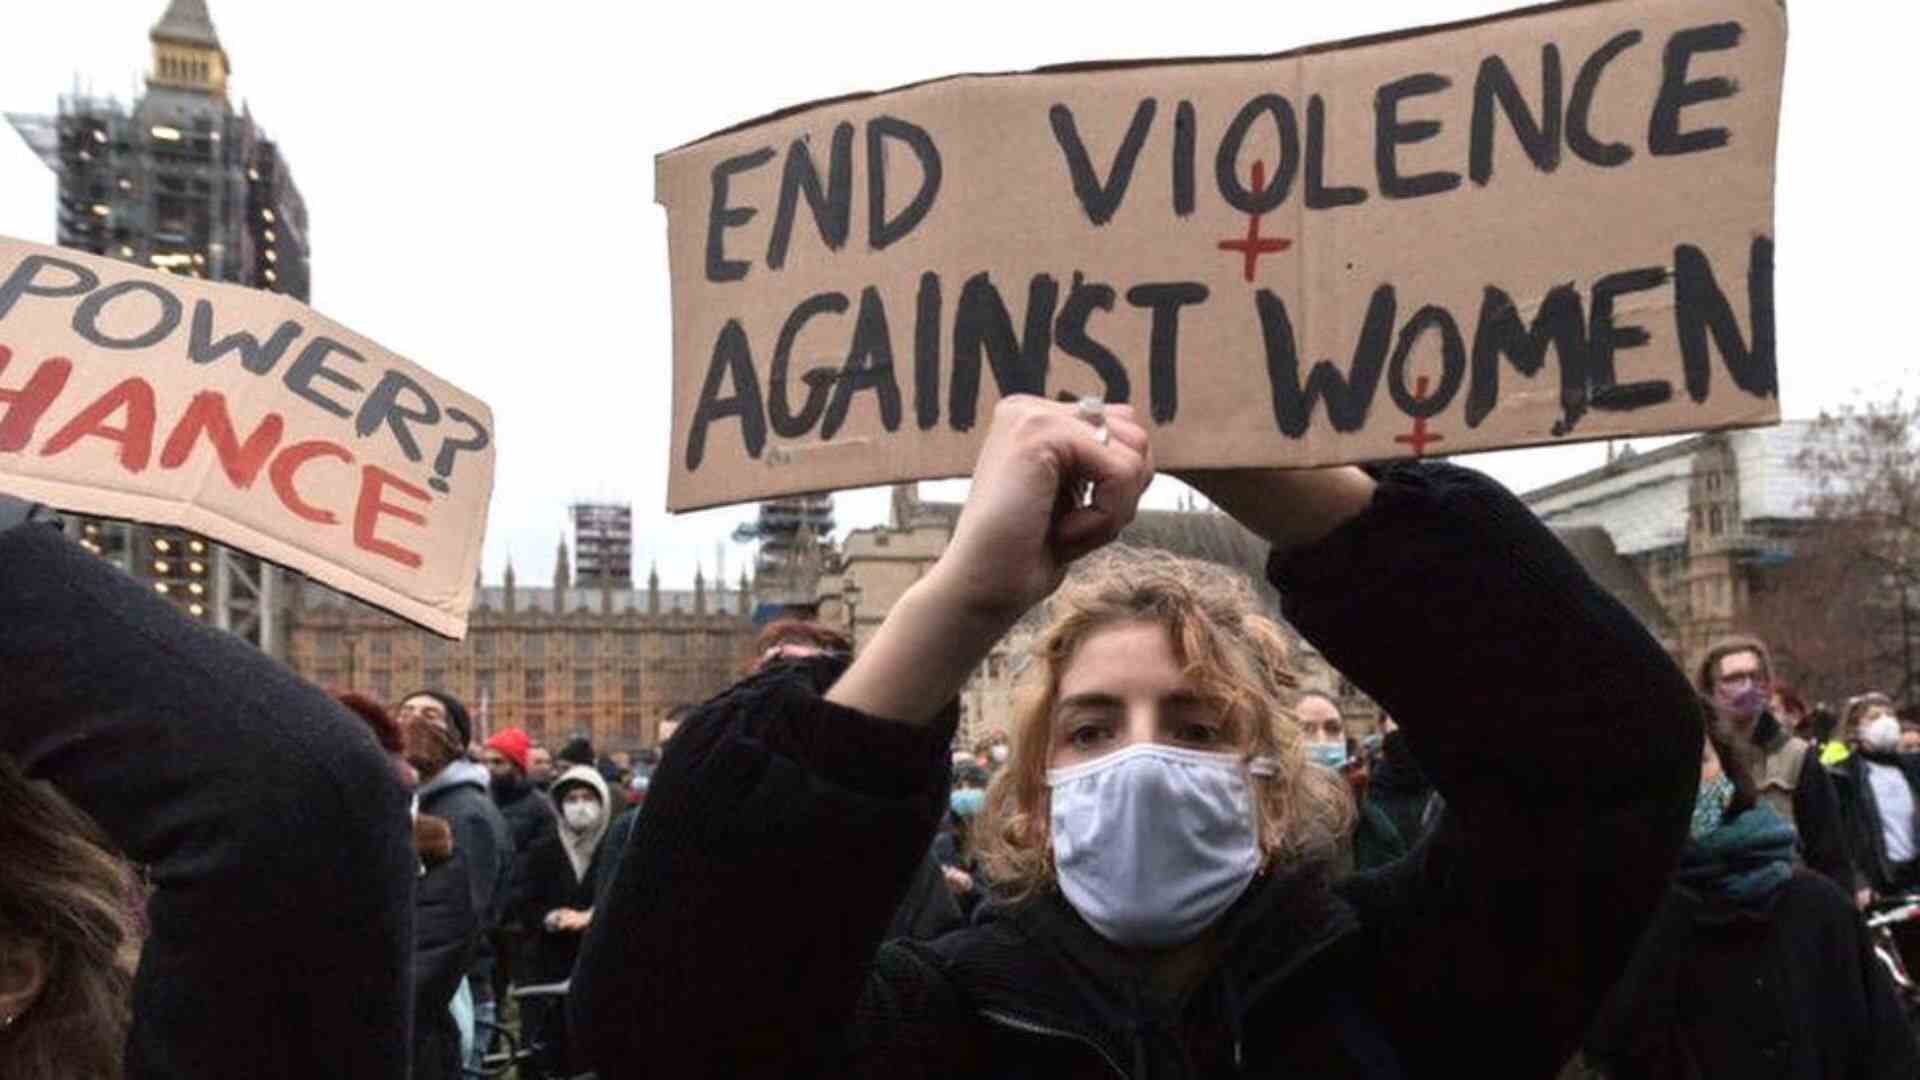 Gender Based Violence In England And Wales Reaches ‘Epidemic Levels’